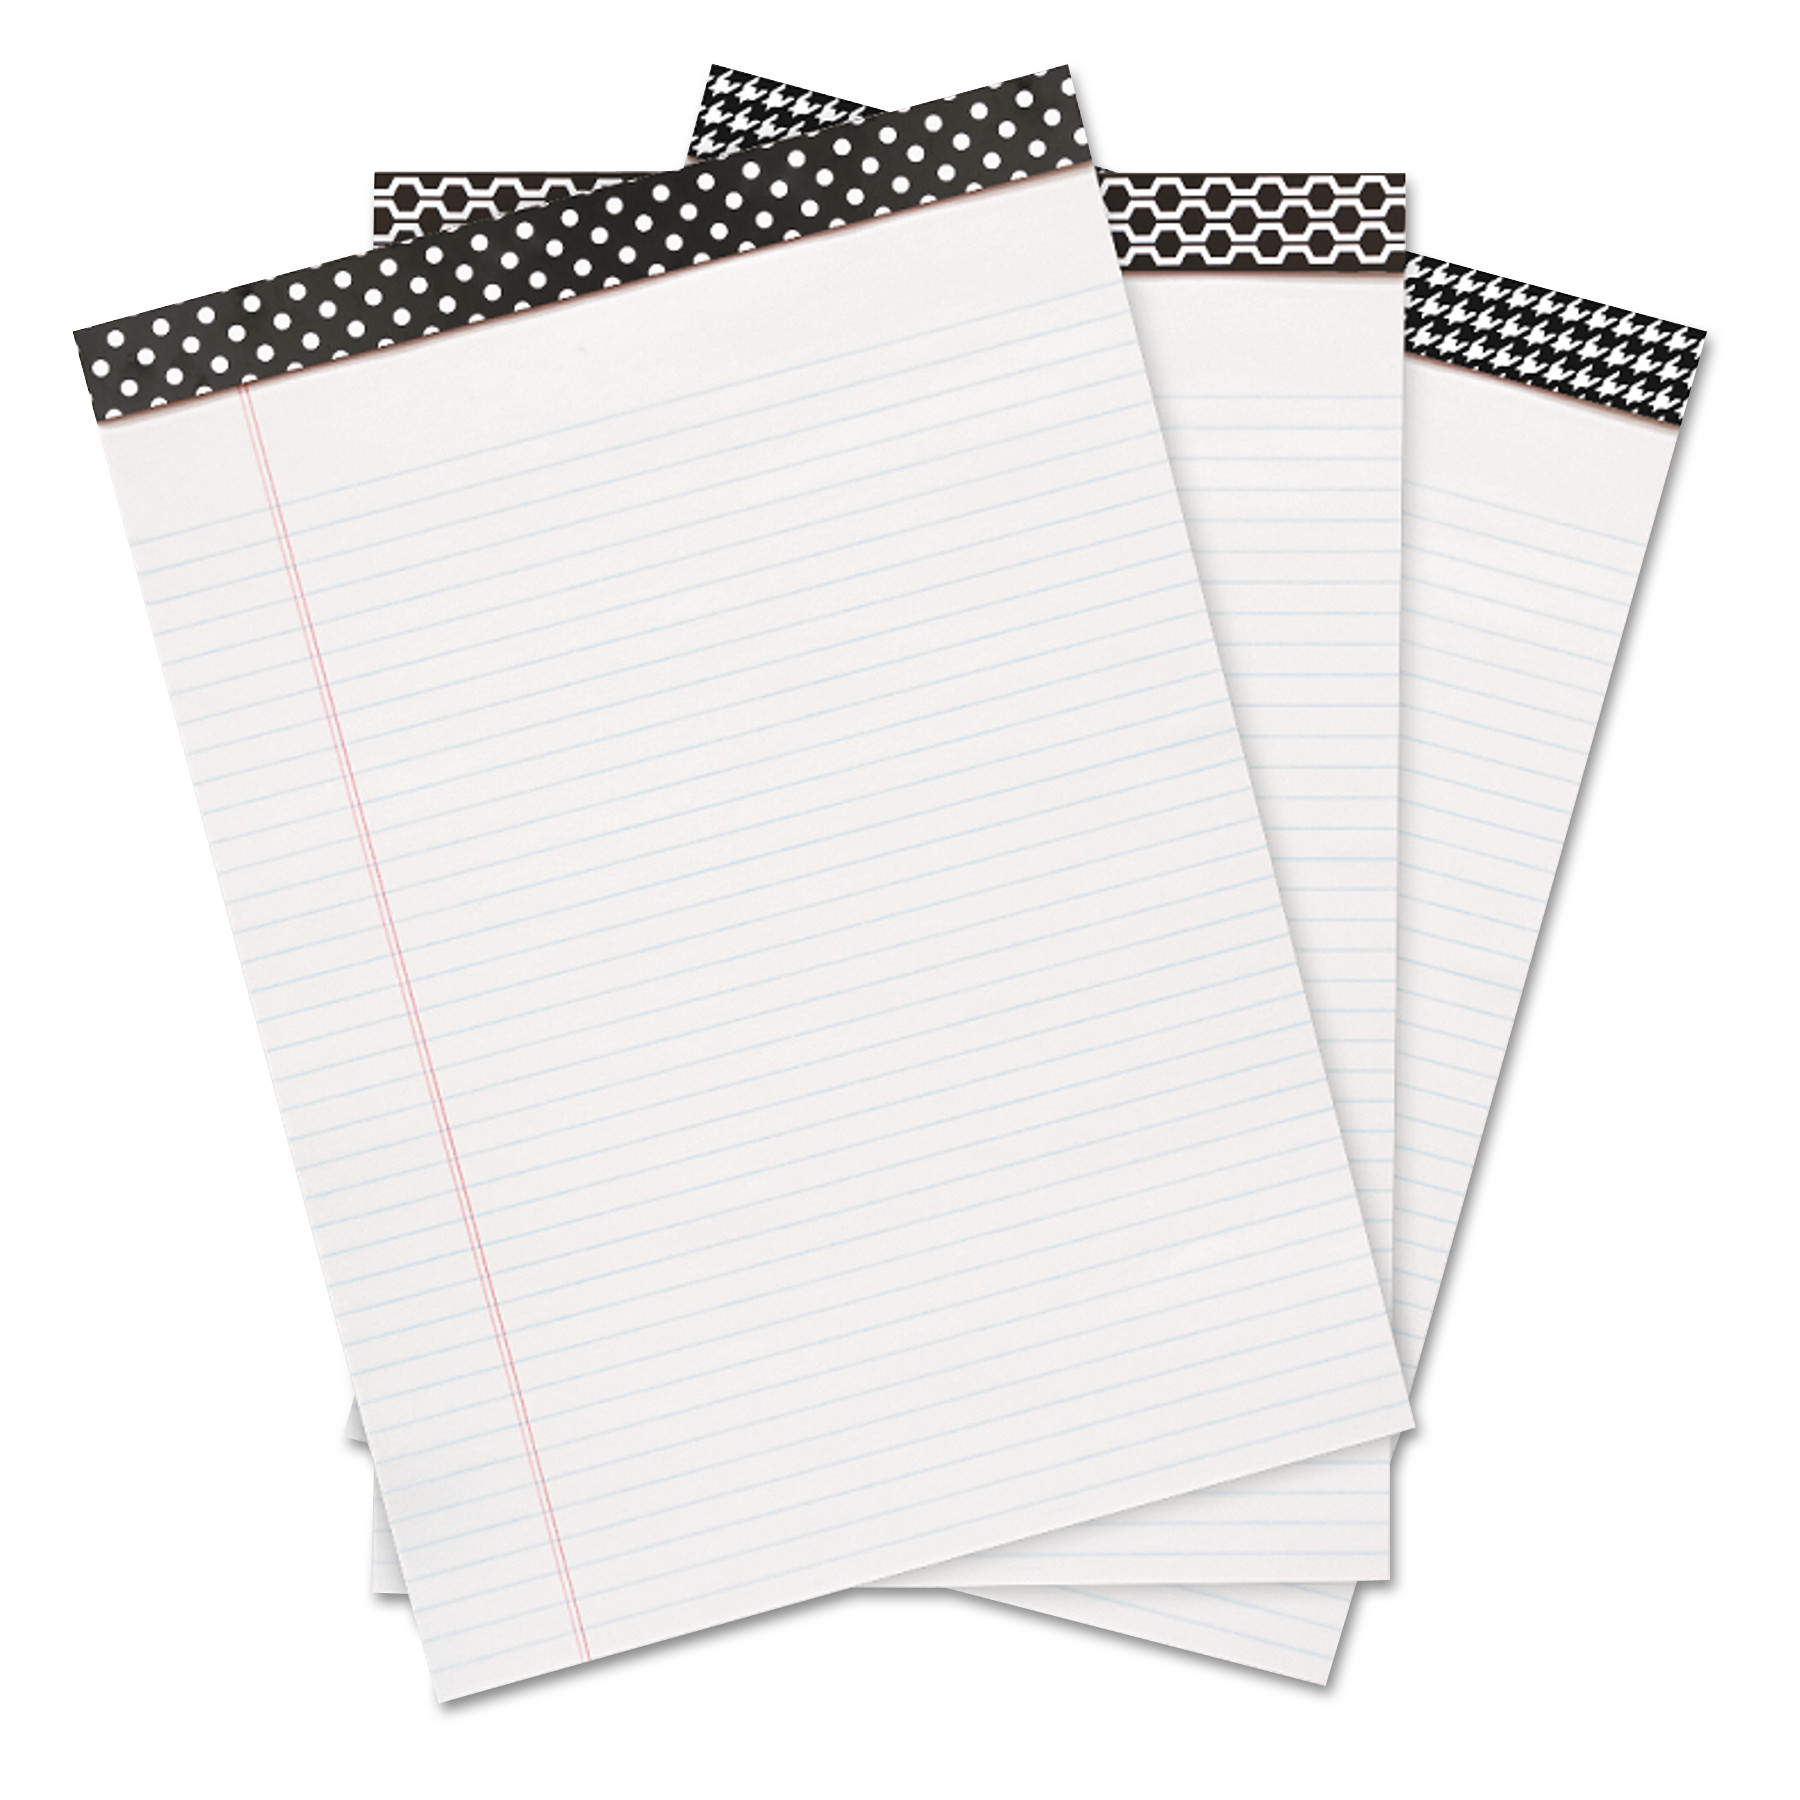  Universal UNV35898 Fashion Writing Pad, Wide/Legal Rule, 5 x 8, White, 50 Sheets, 6/Pack (UNV35898) 